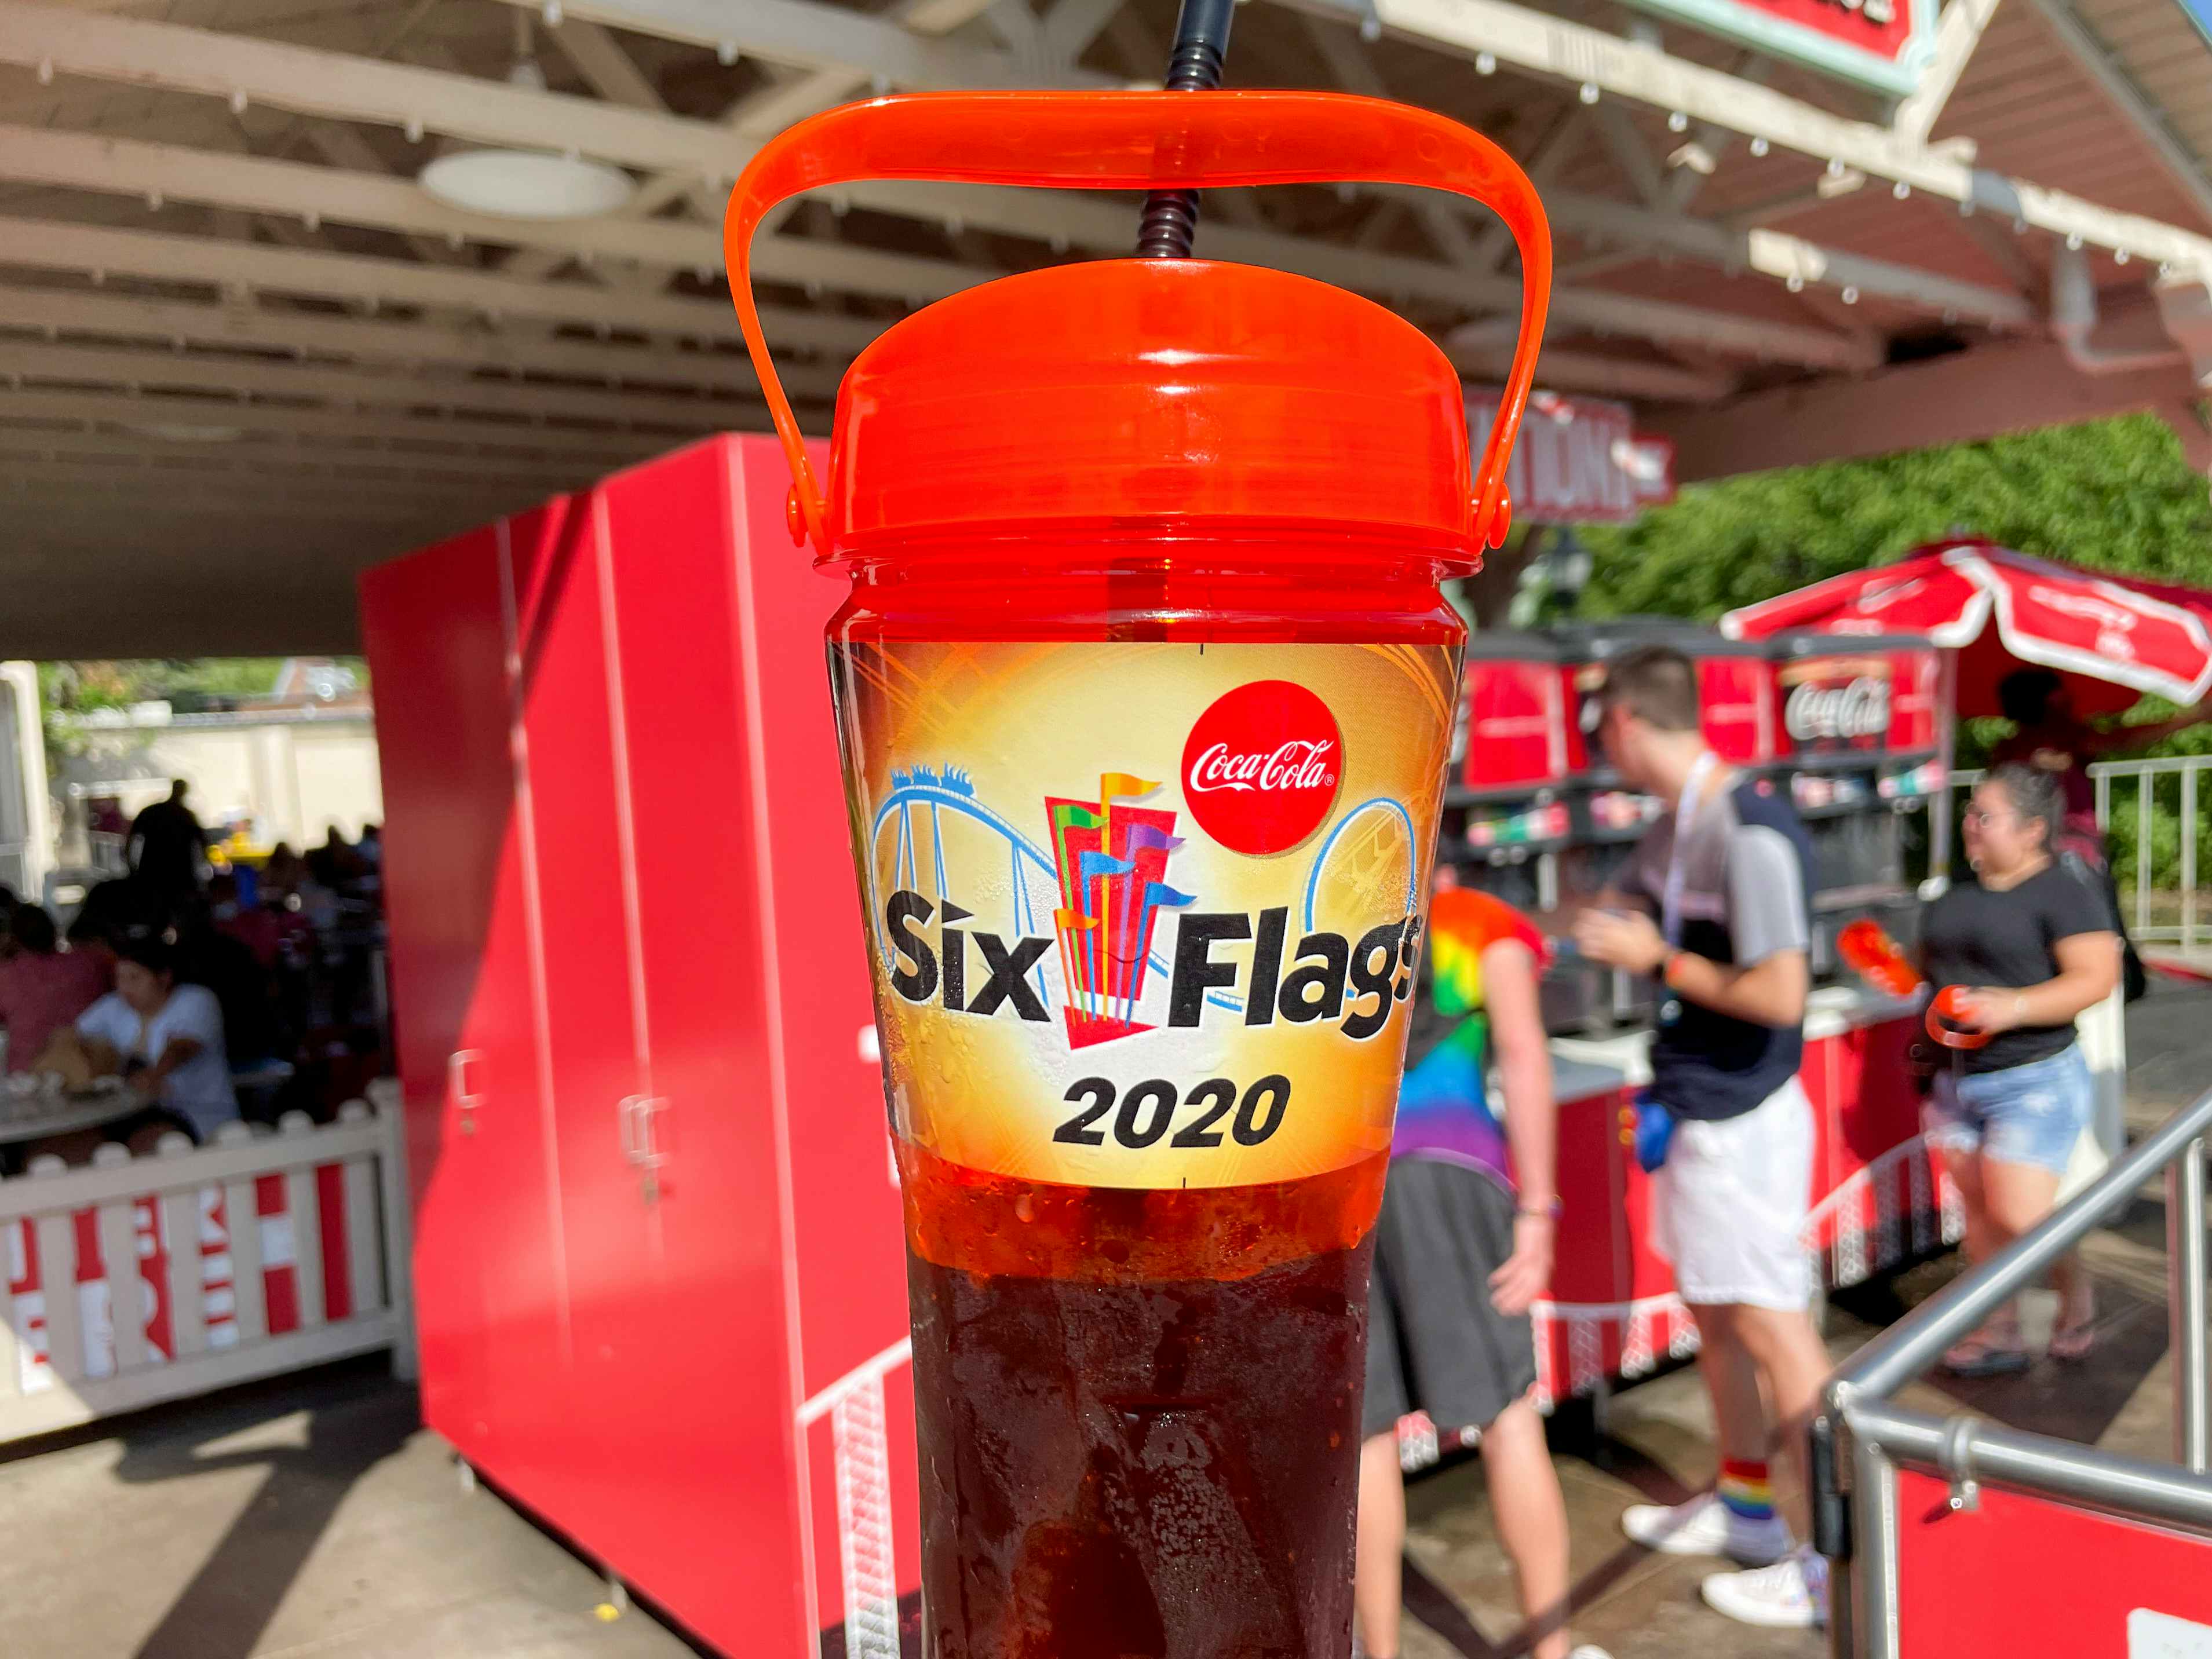 Six flags refillable soft drink cup held in front of a drink station